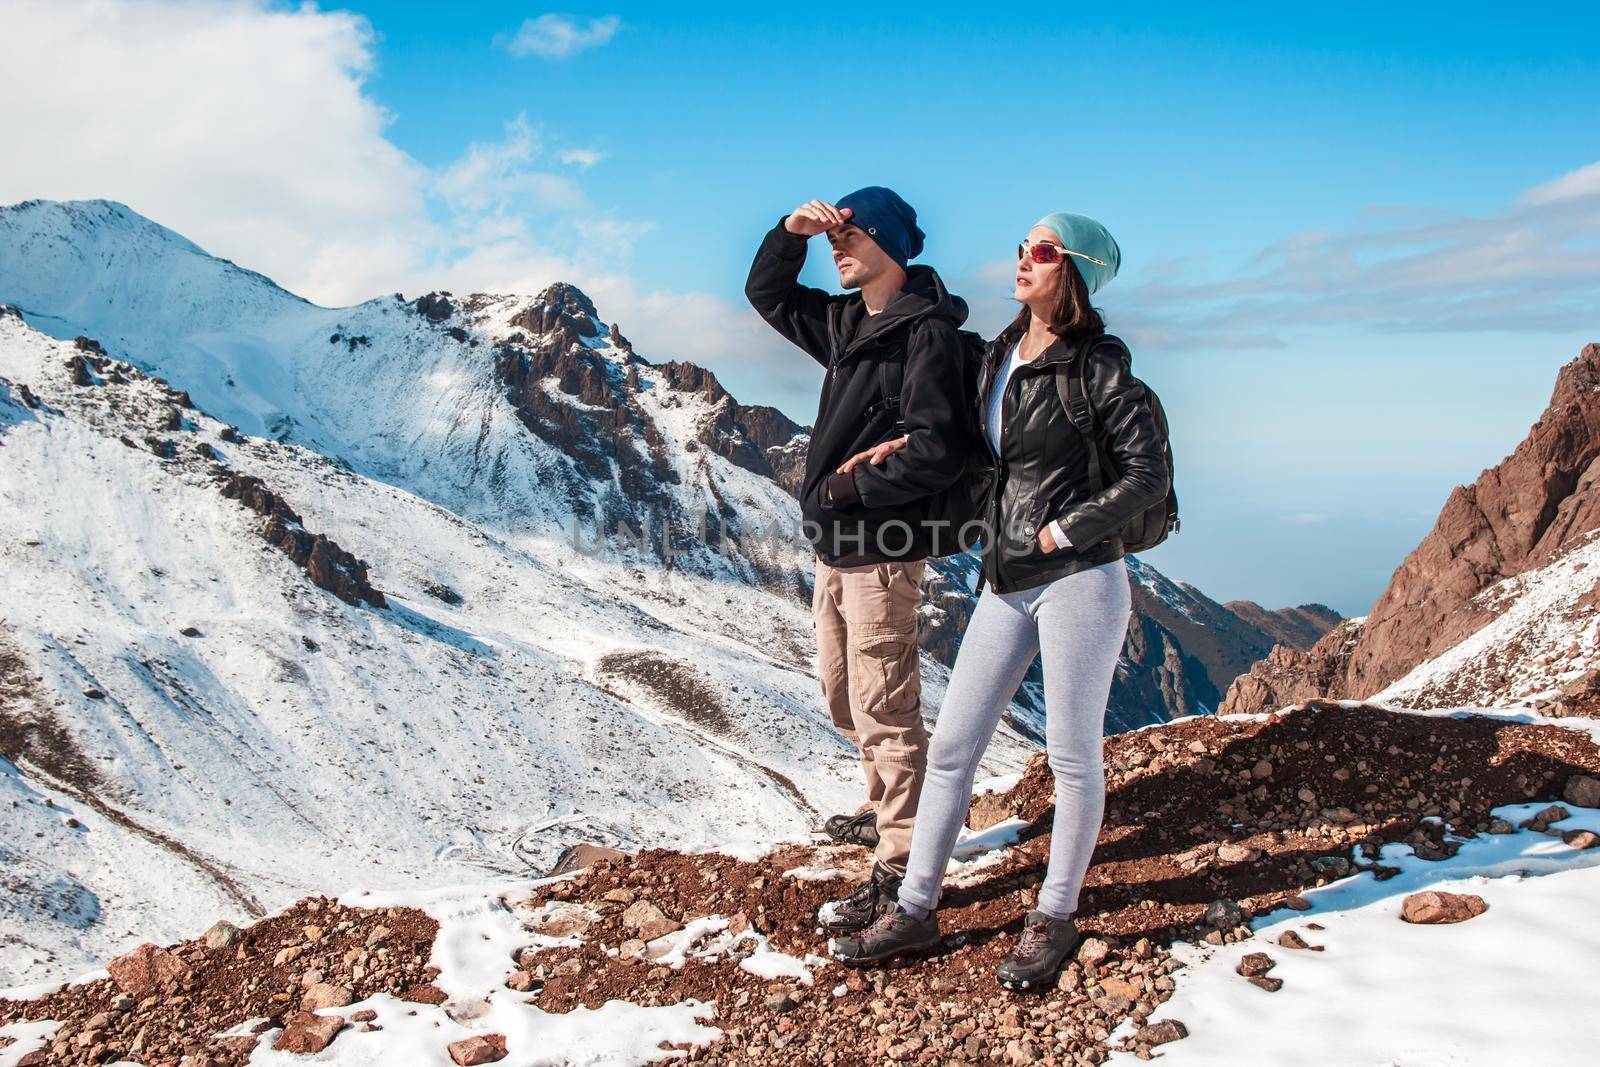 A man and a woman stand in a mountain gorge amid snow slopes.